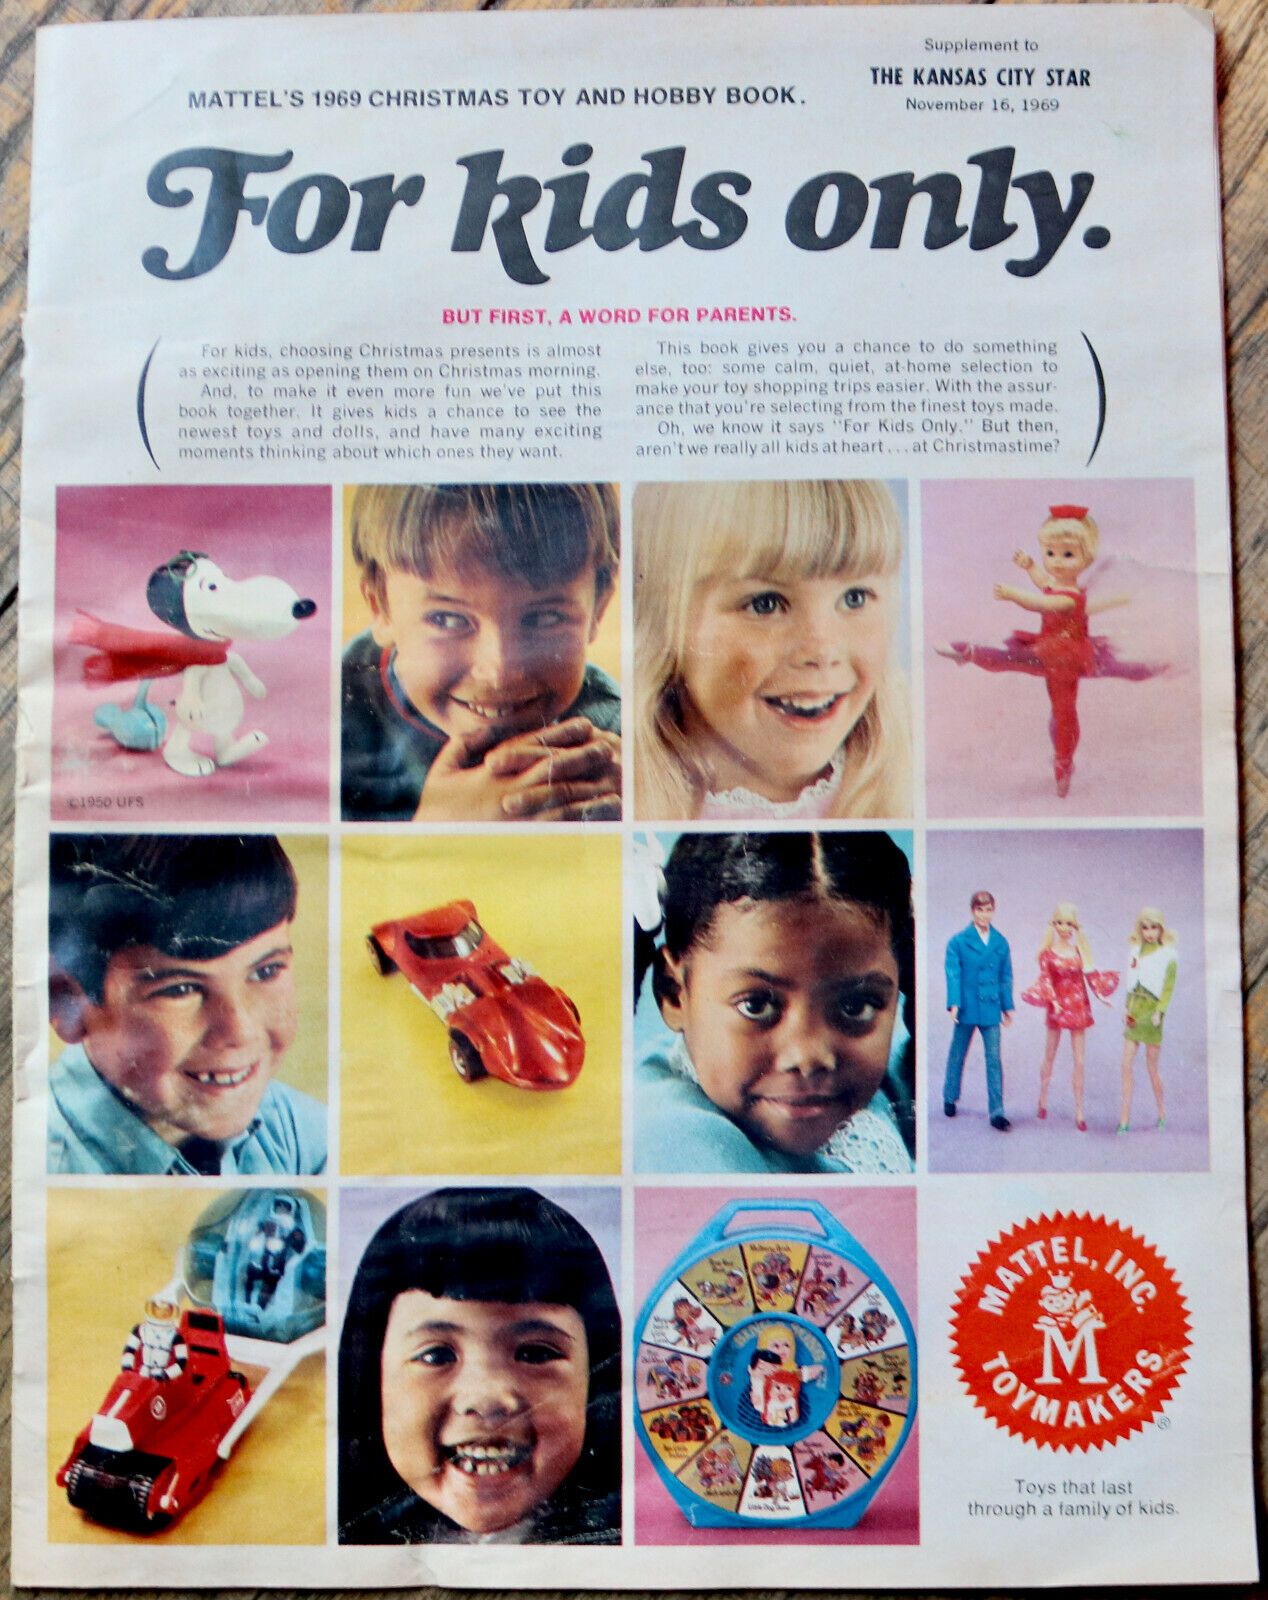 MATTEL 1969 Christmas Toy and hobby book catalog newspaper supplement